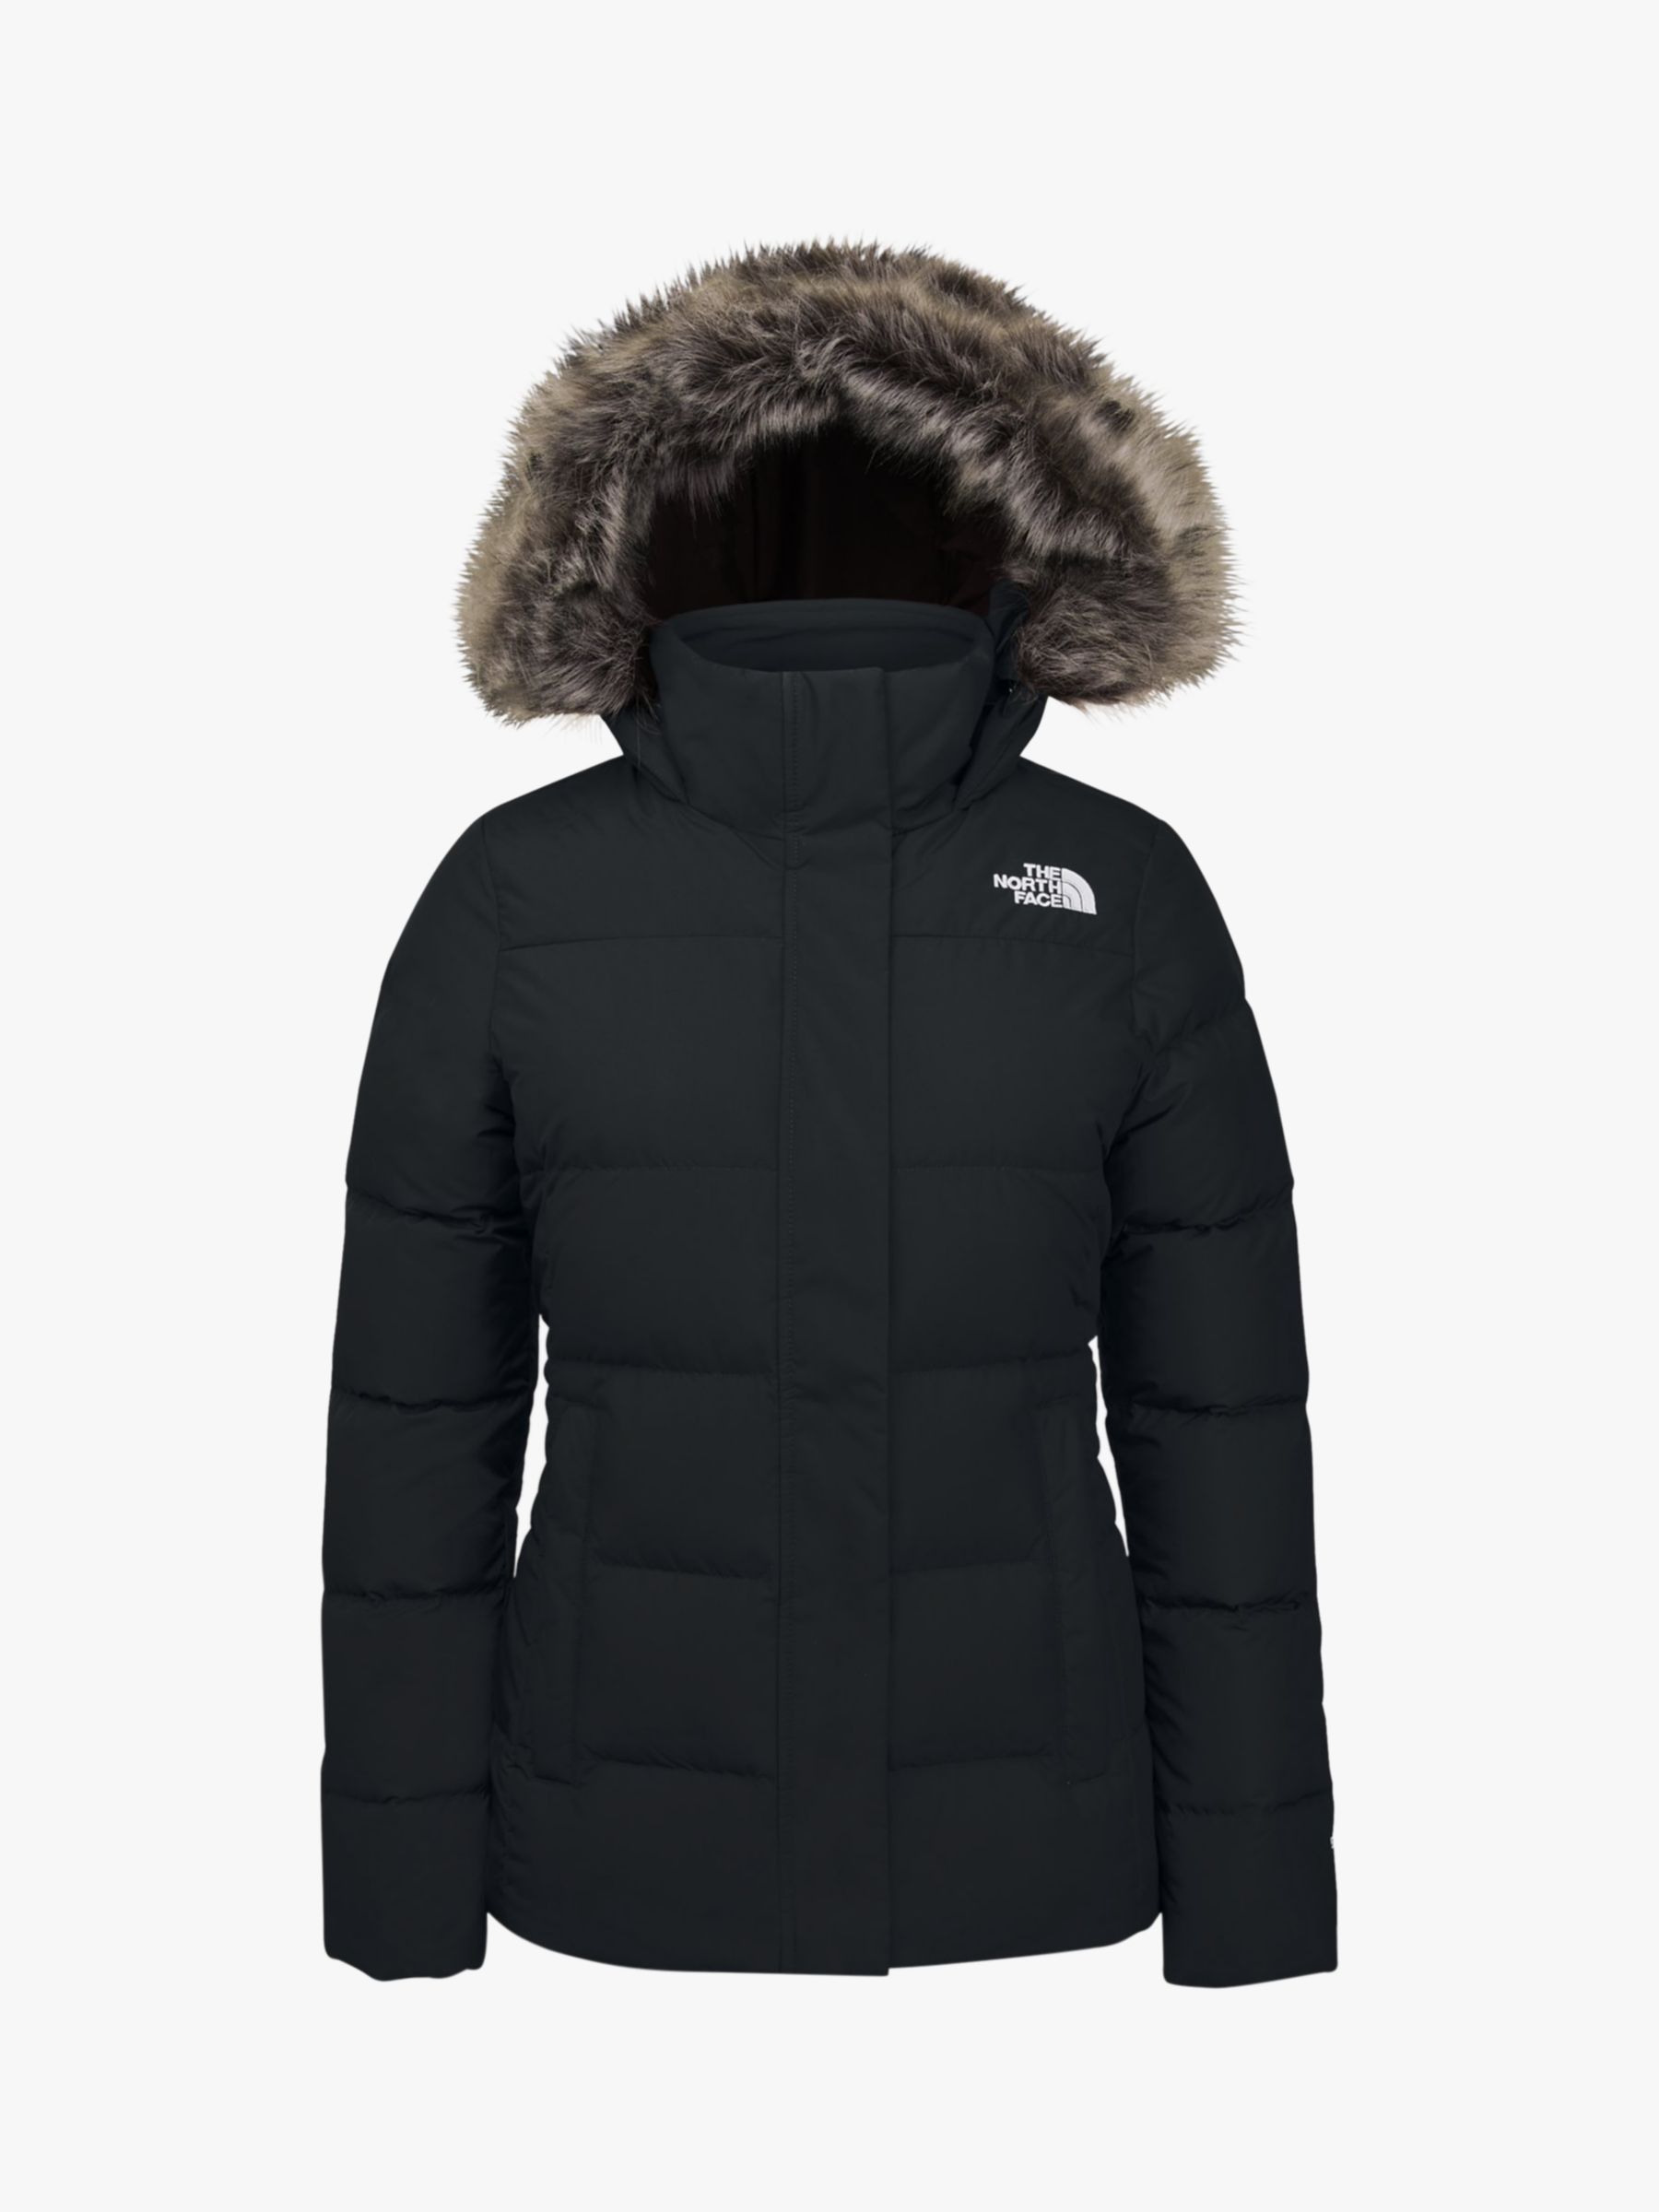 The North Face Gotham Women's Jacket at John Lewis & Partners